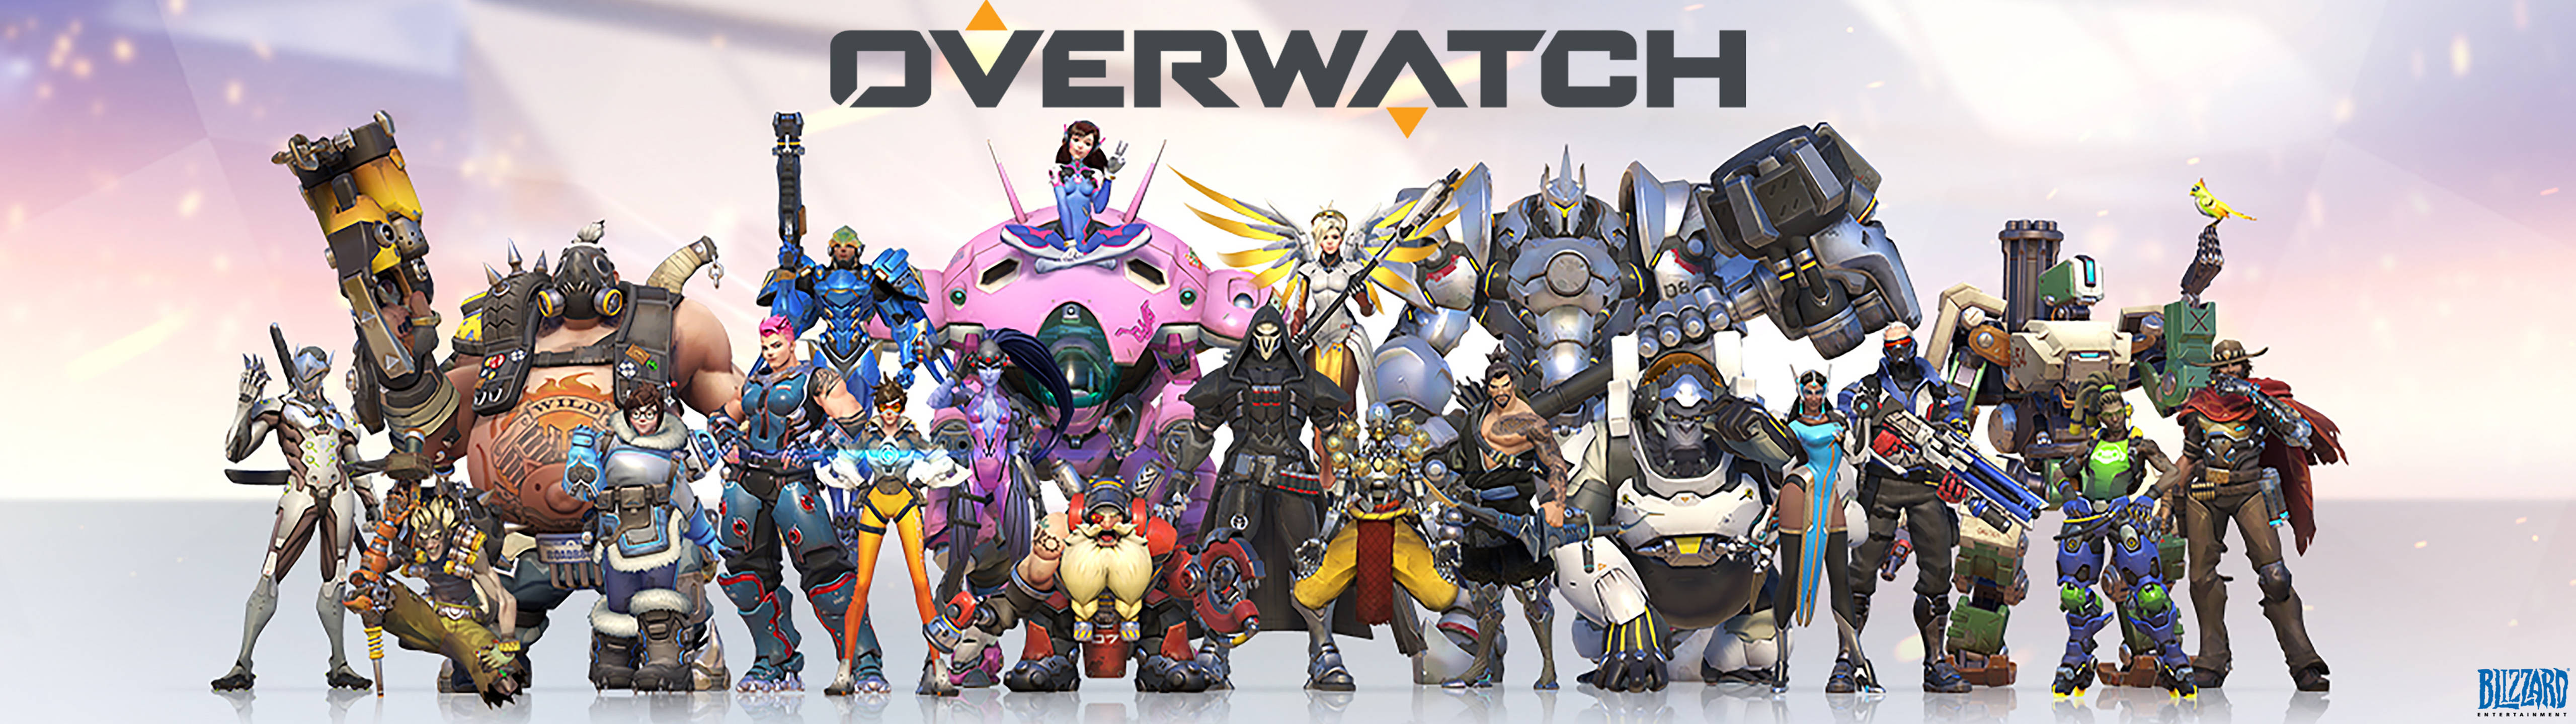 5120x1440 Game Overwatch Characters Background